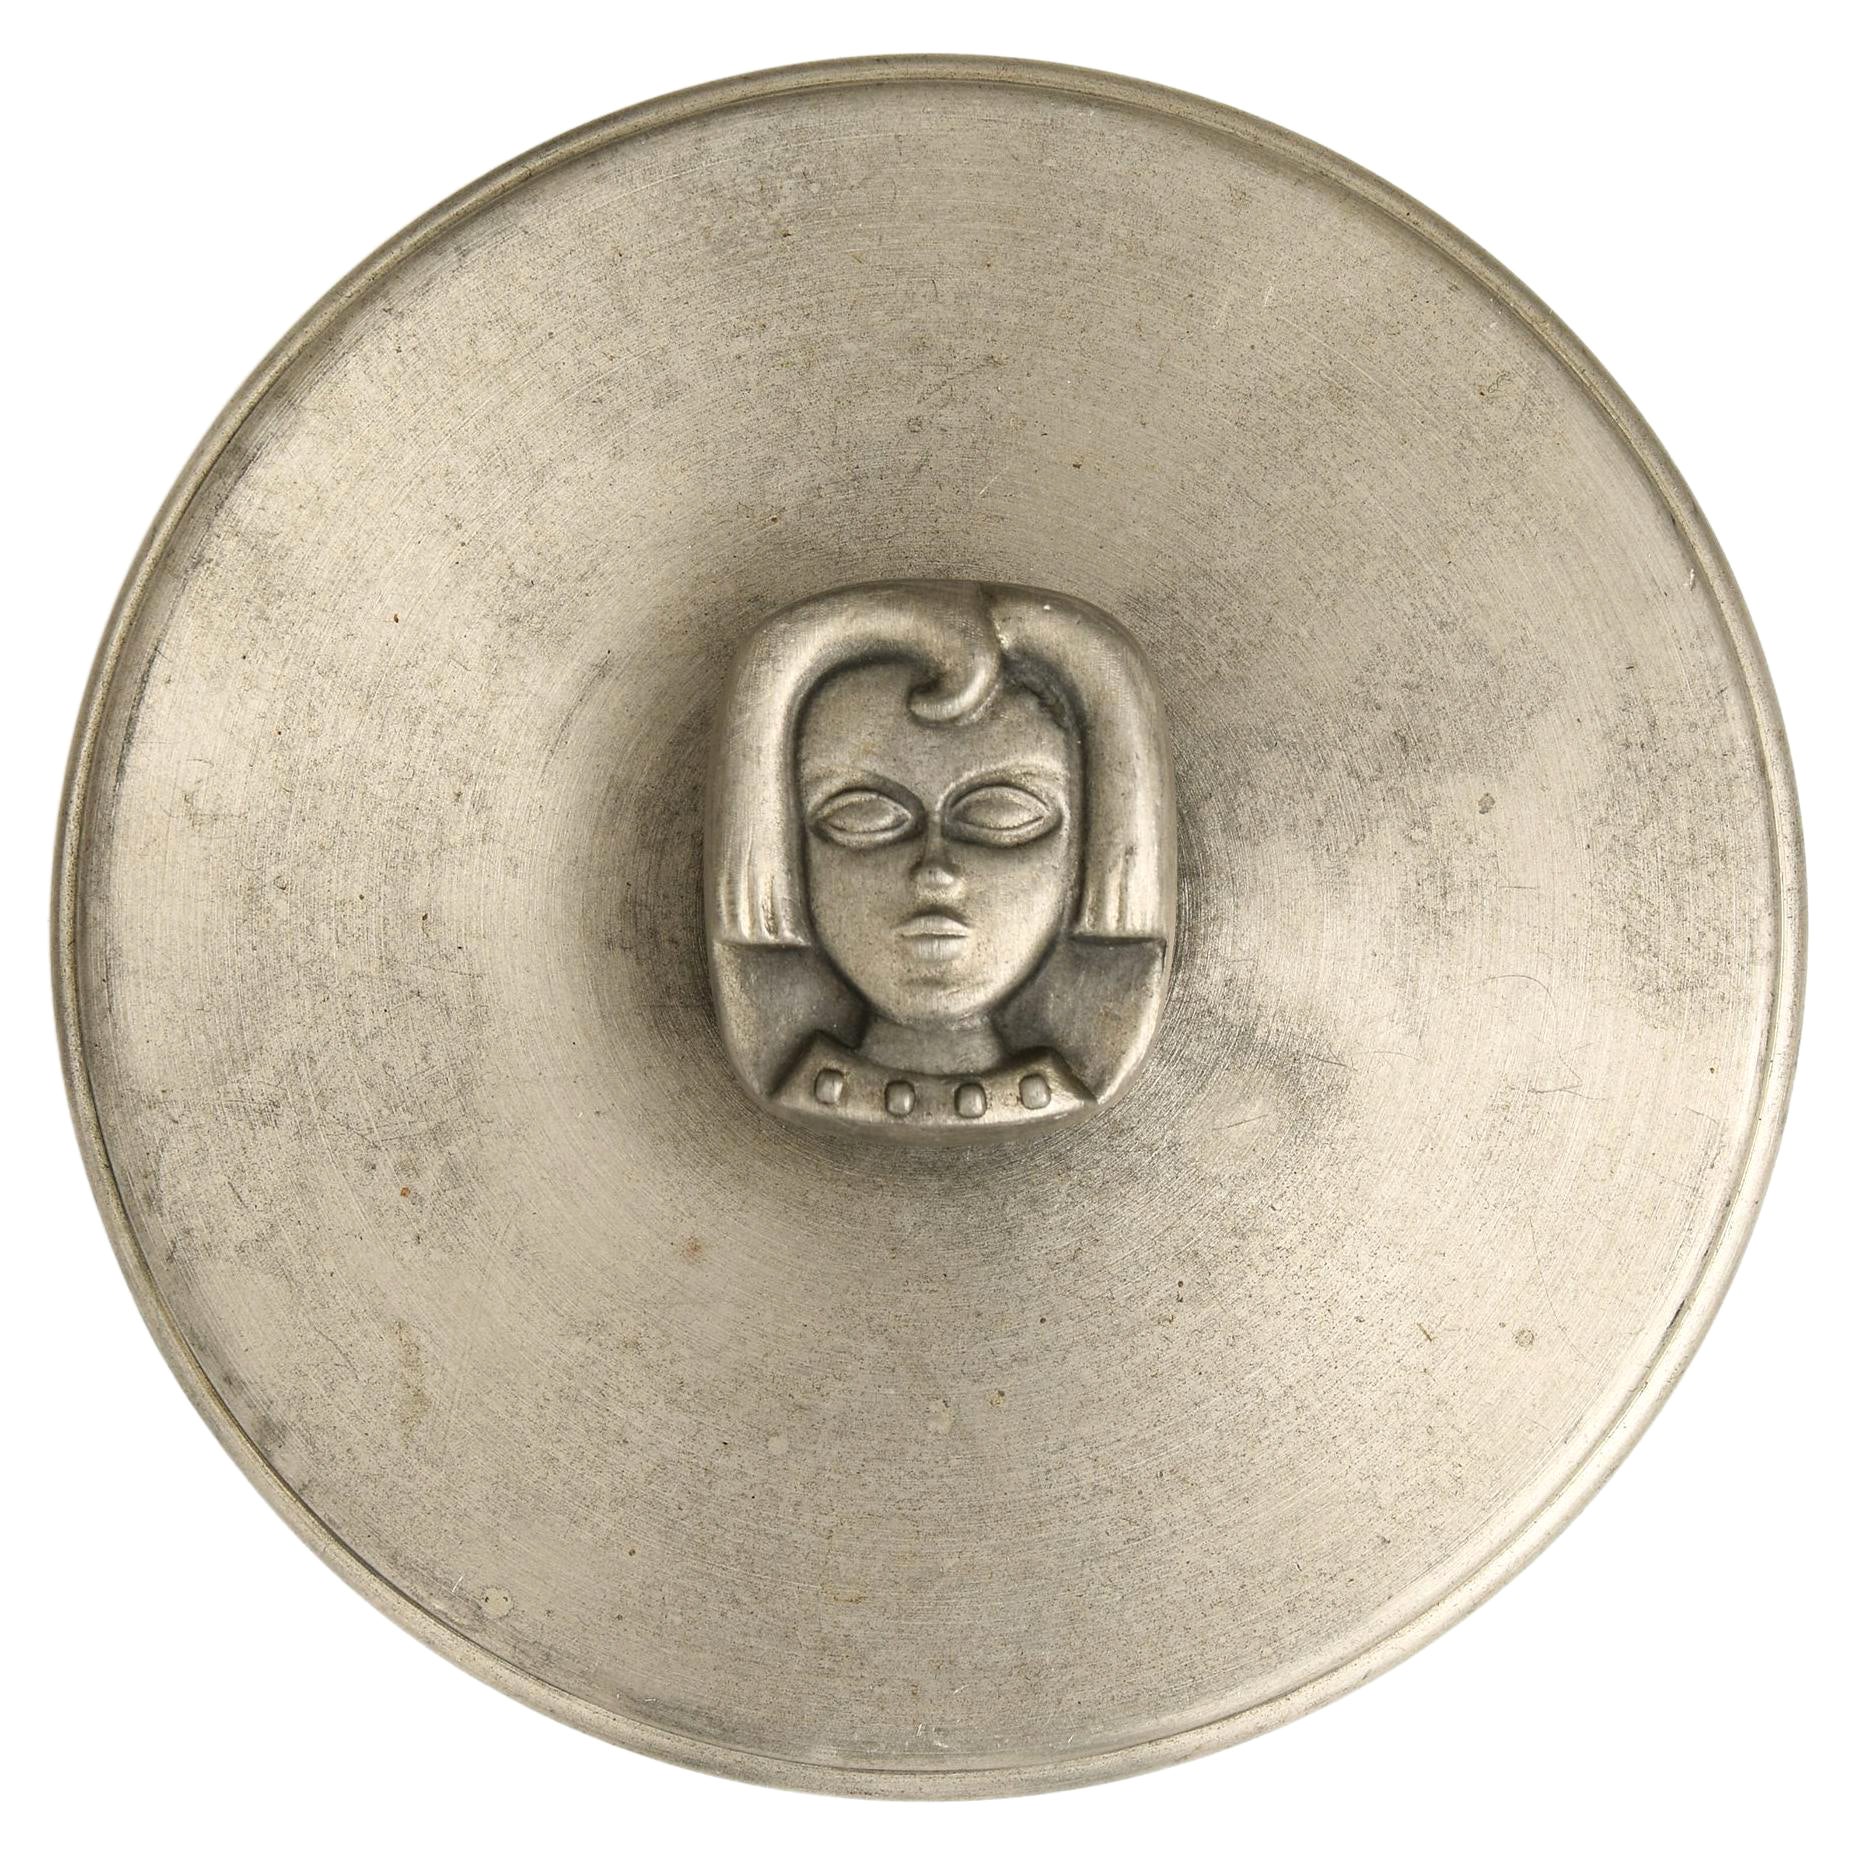 Hand mirror in Pewter, 1940's